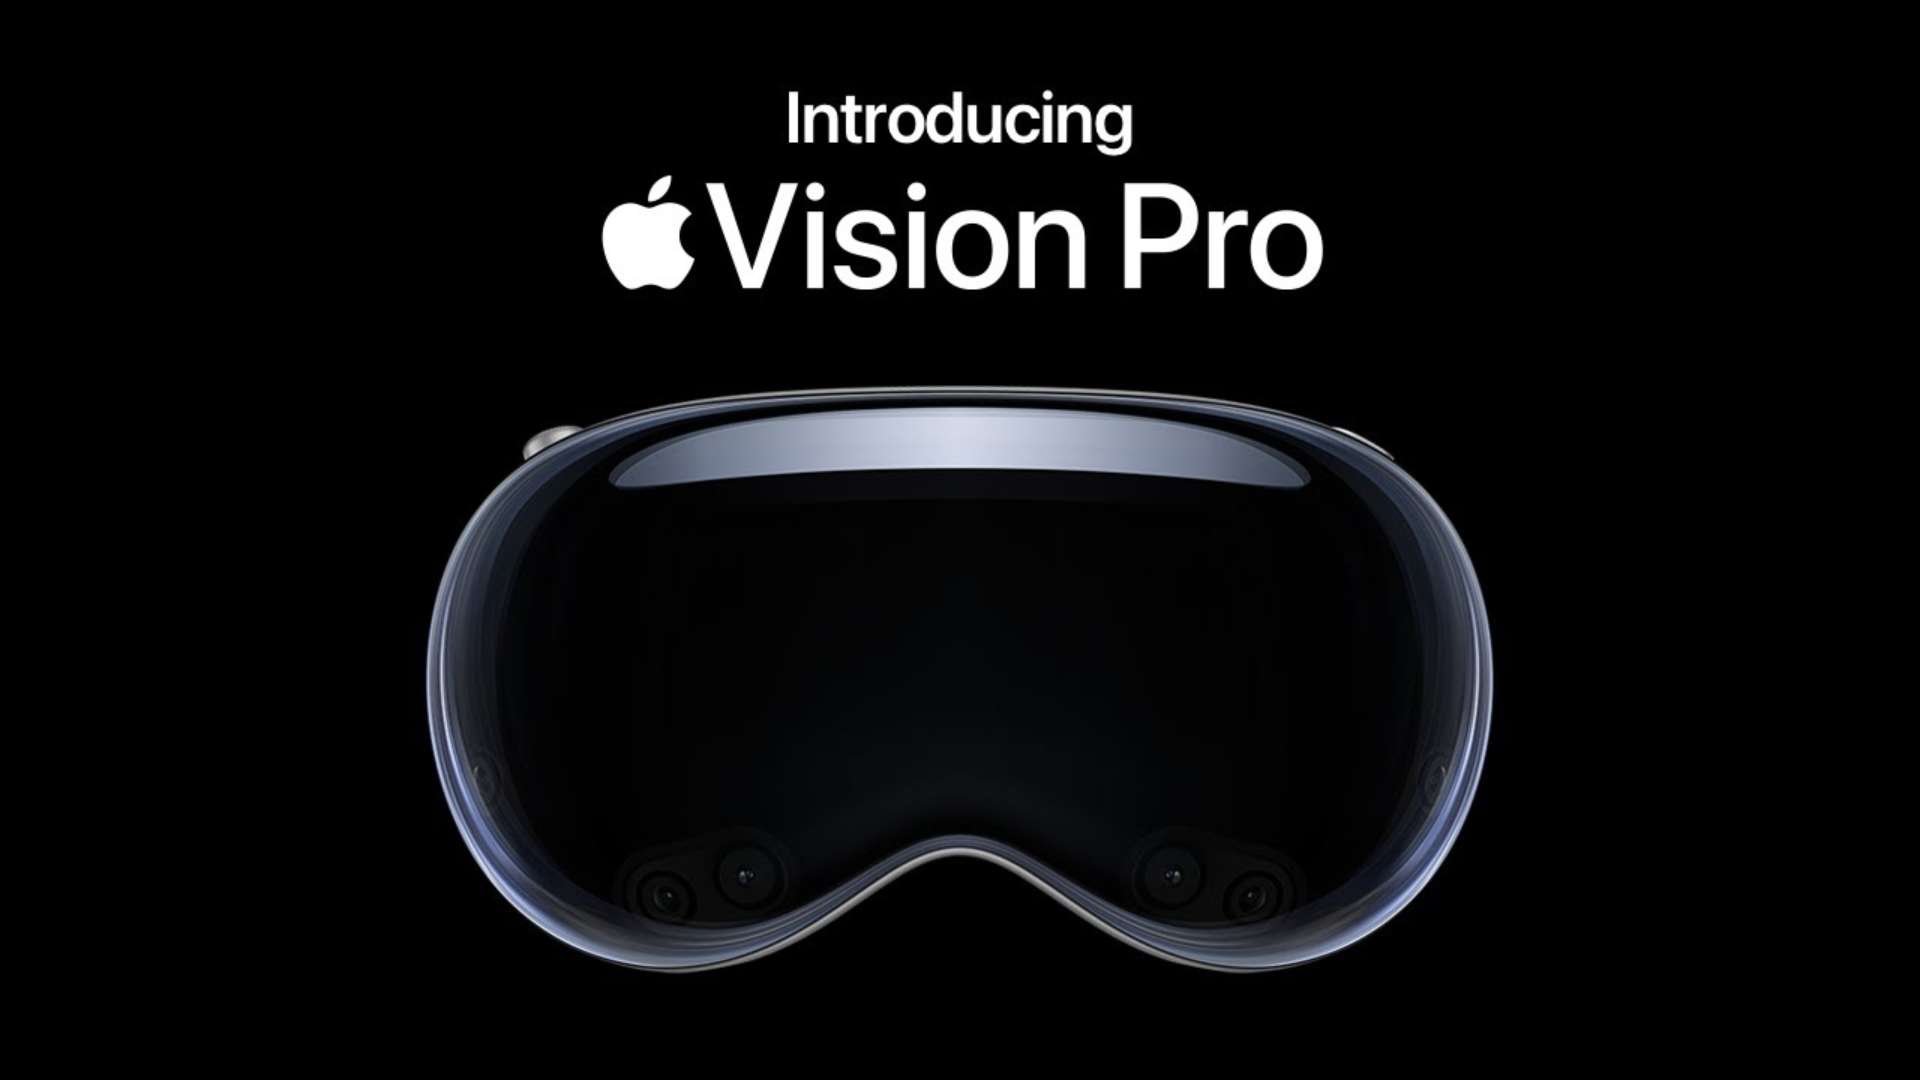 Vision Pro apple video introduction